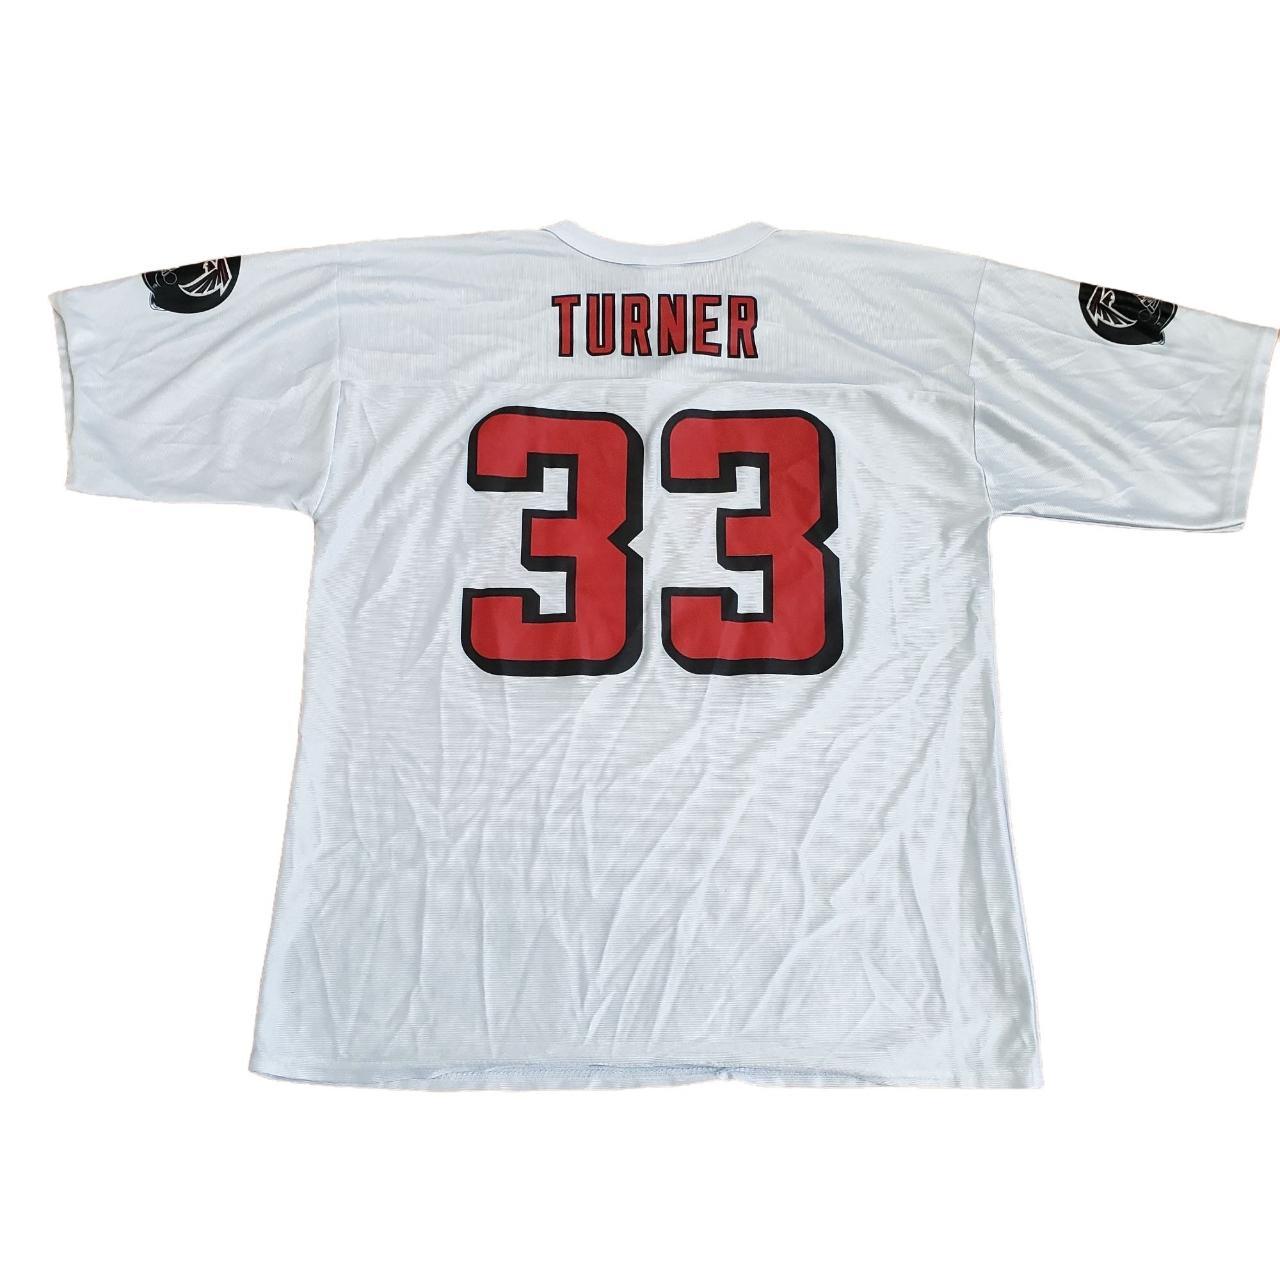 Product Image 2 - NFL. White jersey with red